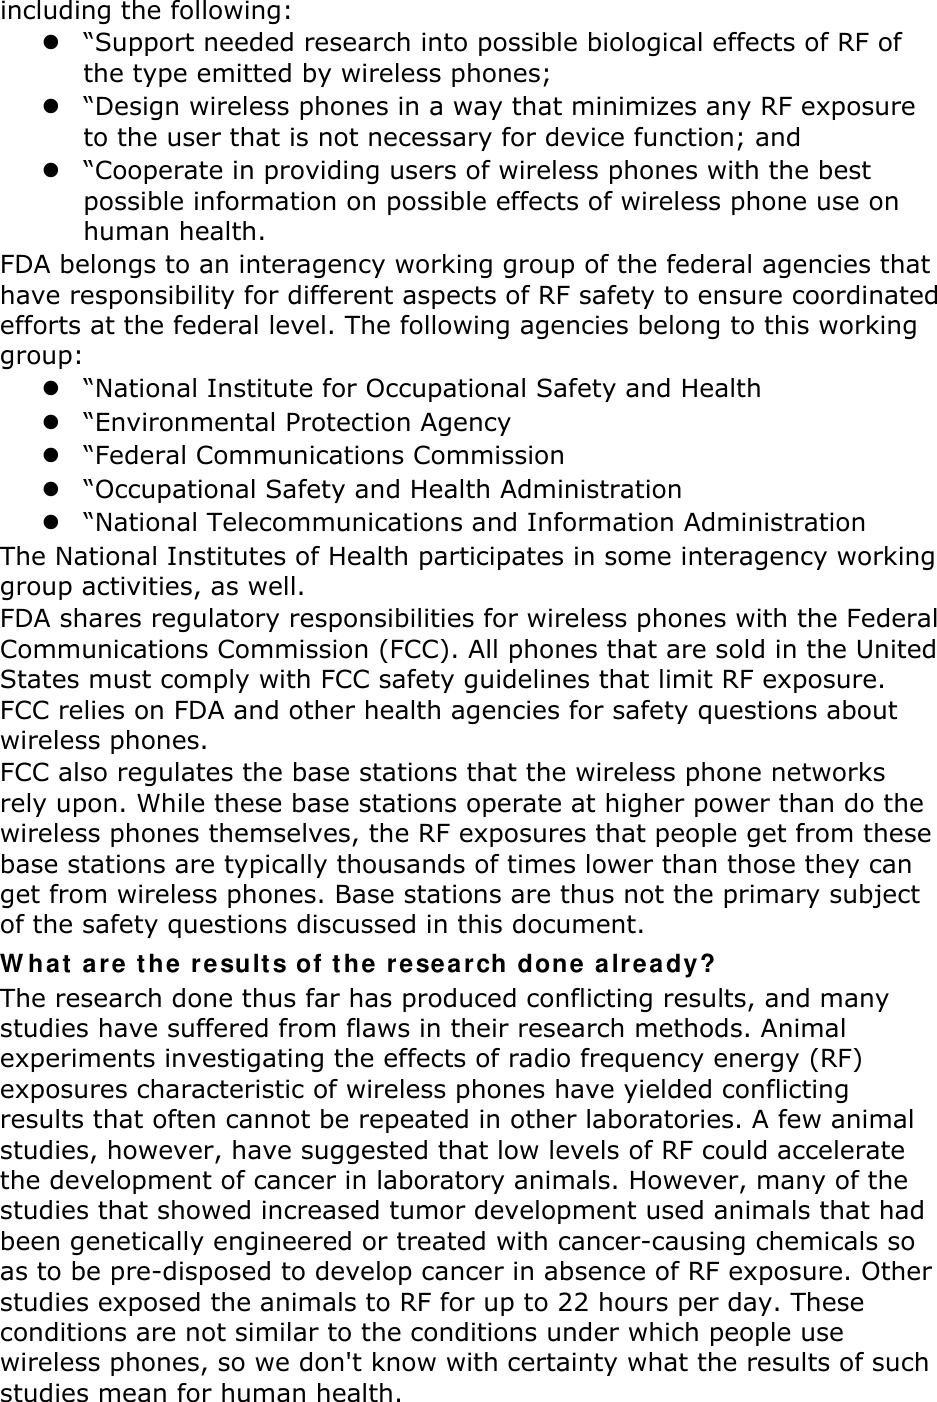 including the following: z “Support needed research into possible biological effects of RF of the type emitted by wireless phones; z “Design wireless phones in a way that minimizes any RF exposure to the user that is not necessary for device function; and z “Cooperate in providing users of wireless phones with the best possible information on possible effects of wireless phone use on human health. FDA belongs to an interagency working group of the federal agencies that have responsibility for different aspects of RF safety to ensure coordinated efforts at the federal level. The following agencies belong to this working group: z “National Institute for Occupational Safety and Health z “Environmental Protection Agency z “Federal Communications Commission z “Occupational Safety and Health Administration z “National Telecommunications and Information Administration The National Institutes of Health participates in some interagency working group activities, as well. FDA shares regulatory responsibilities for wireless phones with the Federal Communications Commission (FCC). All phones that are sold in the United States must comply with FCC safety guidelines that limit RF exposure. FCC relies on FDA and other health agencies for safety questions about wireless phones. FCC also regulates the base stations that the wireless phone networks rely upon. While these base stations operate at higher power than do the wireless phones themselves, the RF exposures that people get from these base stations are typically thousands of times lower than those they can get from wireless phones. Base stations are thus not the primary subject of the safety questions discussed in this document. W ha t  are the re sults of t he re search  done a lrea dy? The research done thus far has produced conflicting results, and many studies have suffered from flaws in their research methods. Animal experiments investigating the effects of radio frequency energy (RF) exposures characteristic of wireless phones have yielded conflicting results that often cannot be repeated in other laboratories. A few animal studies, however, have suggested that low levels of RF could accelerate the development of cancer in laboratory animals. However, many of the studies that showed increased tumor development used animals that had been genetically engineered or treated with cancer-causing chemicals so as to be pre-disposed to develop cancer in absence of RF exposure. Other studies exposed the animals to RF for up to 22 hours per day. These conditions are not similar to the conditions under which people use wireless phones, so we don&apos;t know with certainty what the results of such studies mean for human health. 